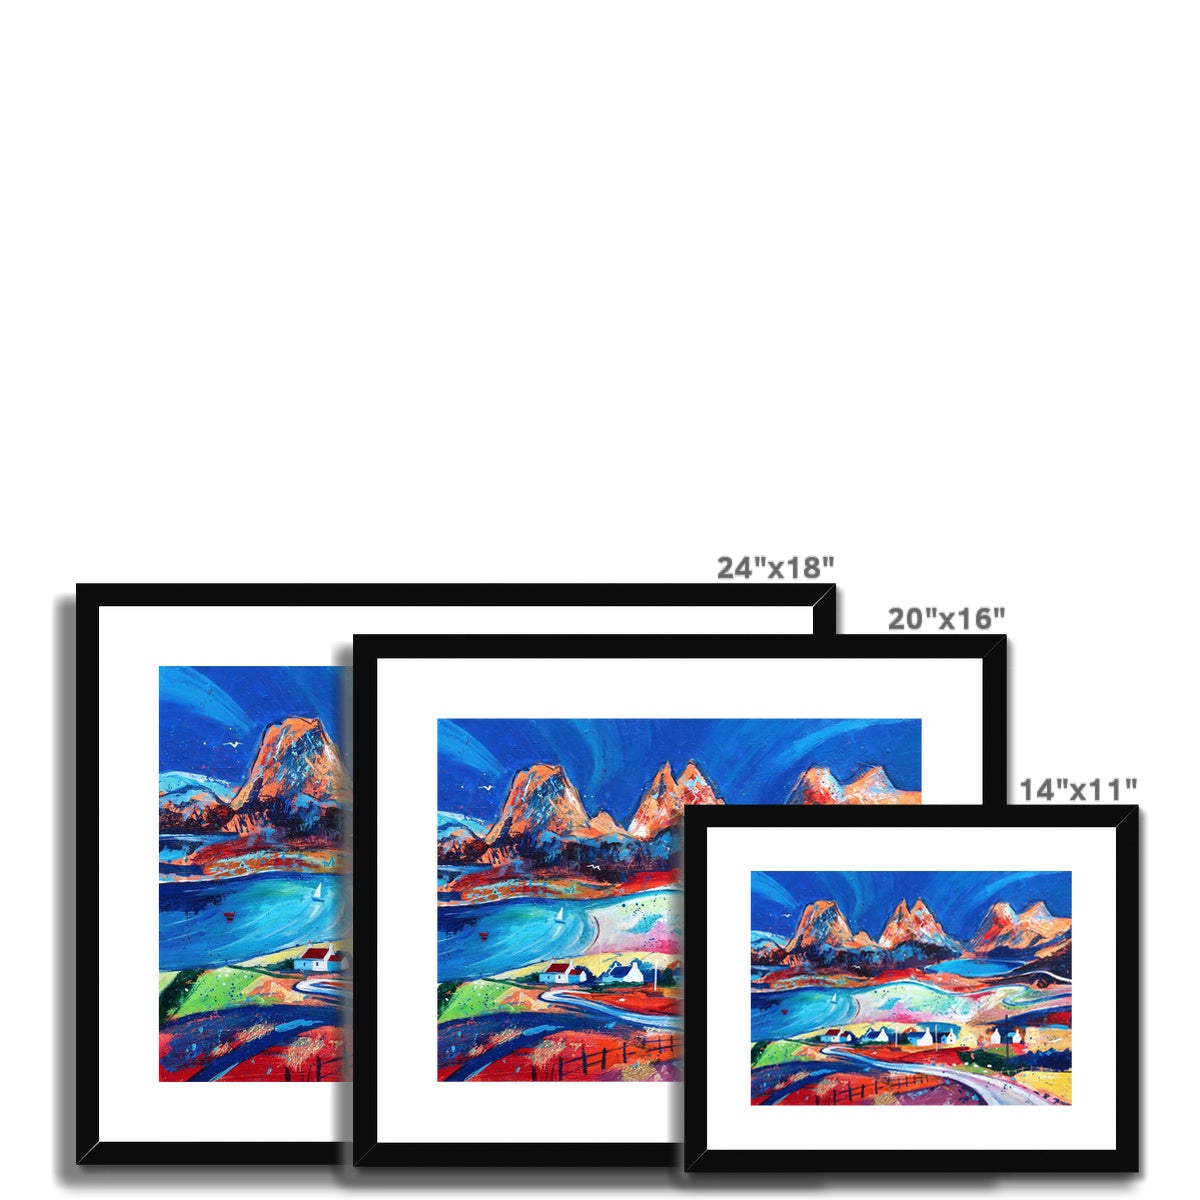 Summer's Day, Coigach Cottages to Stac Pollaidh Framed & Mounted Print